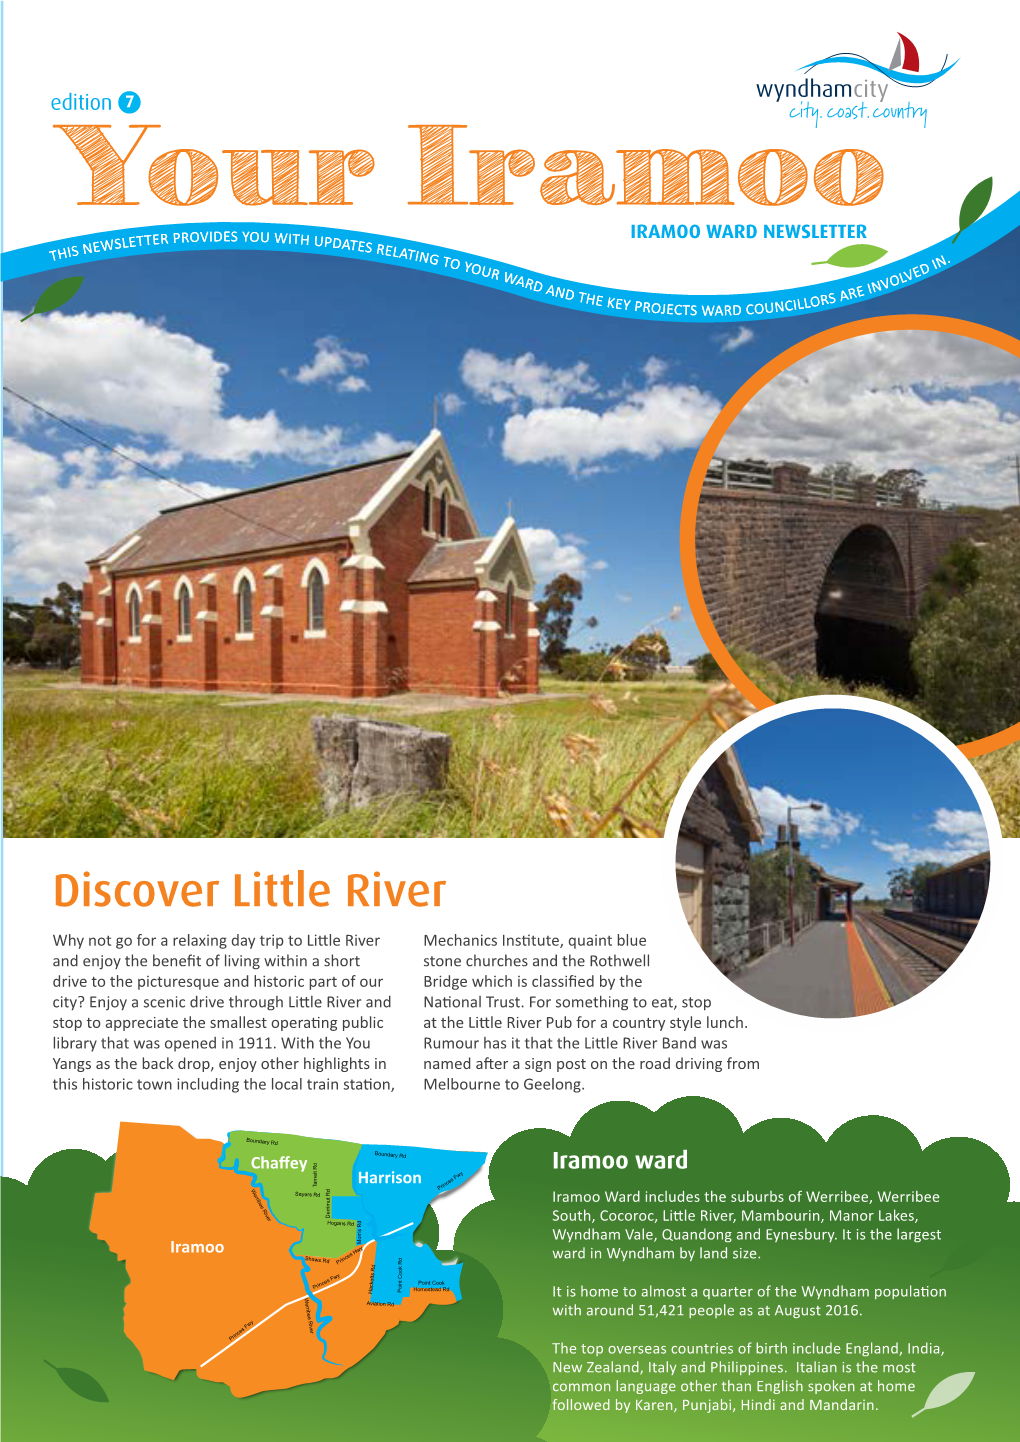 Discover Little River